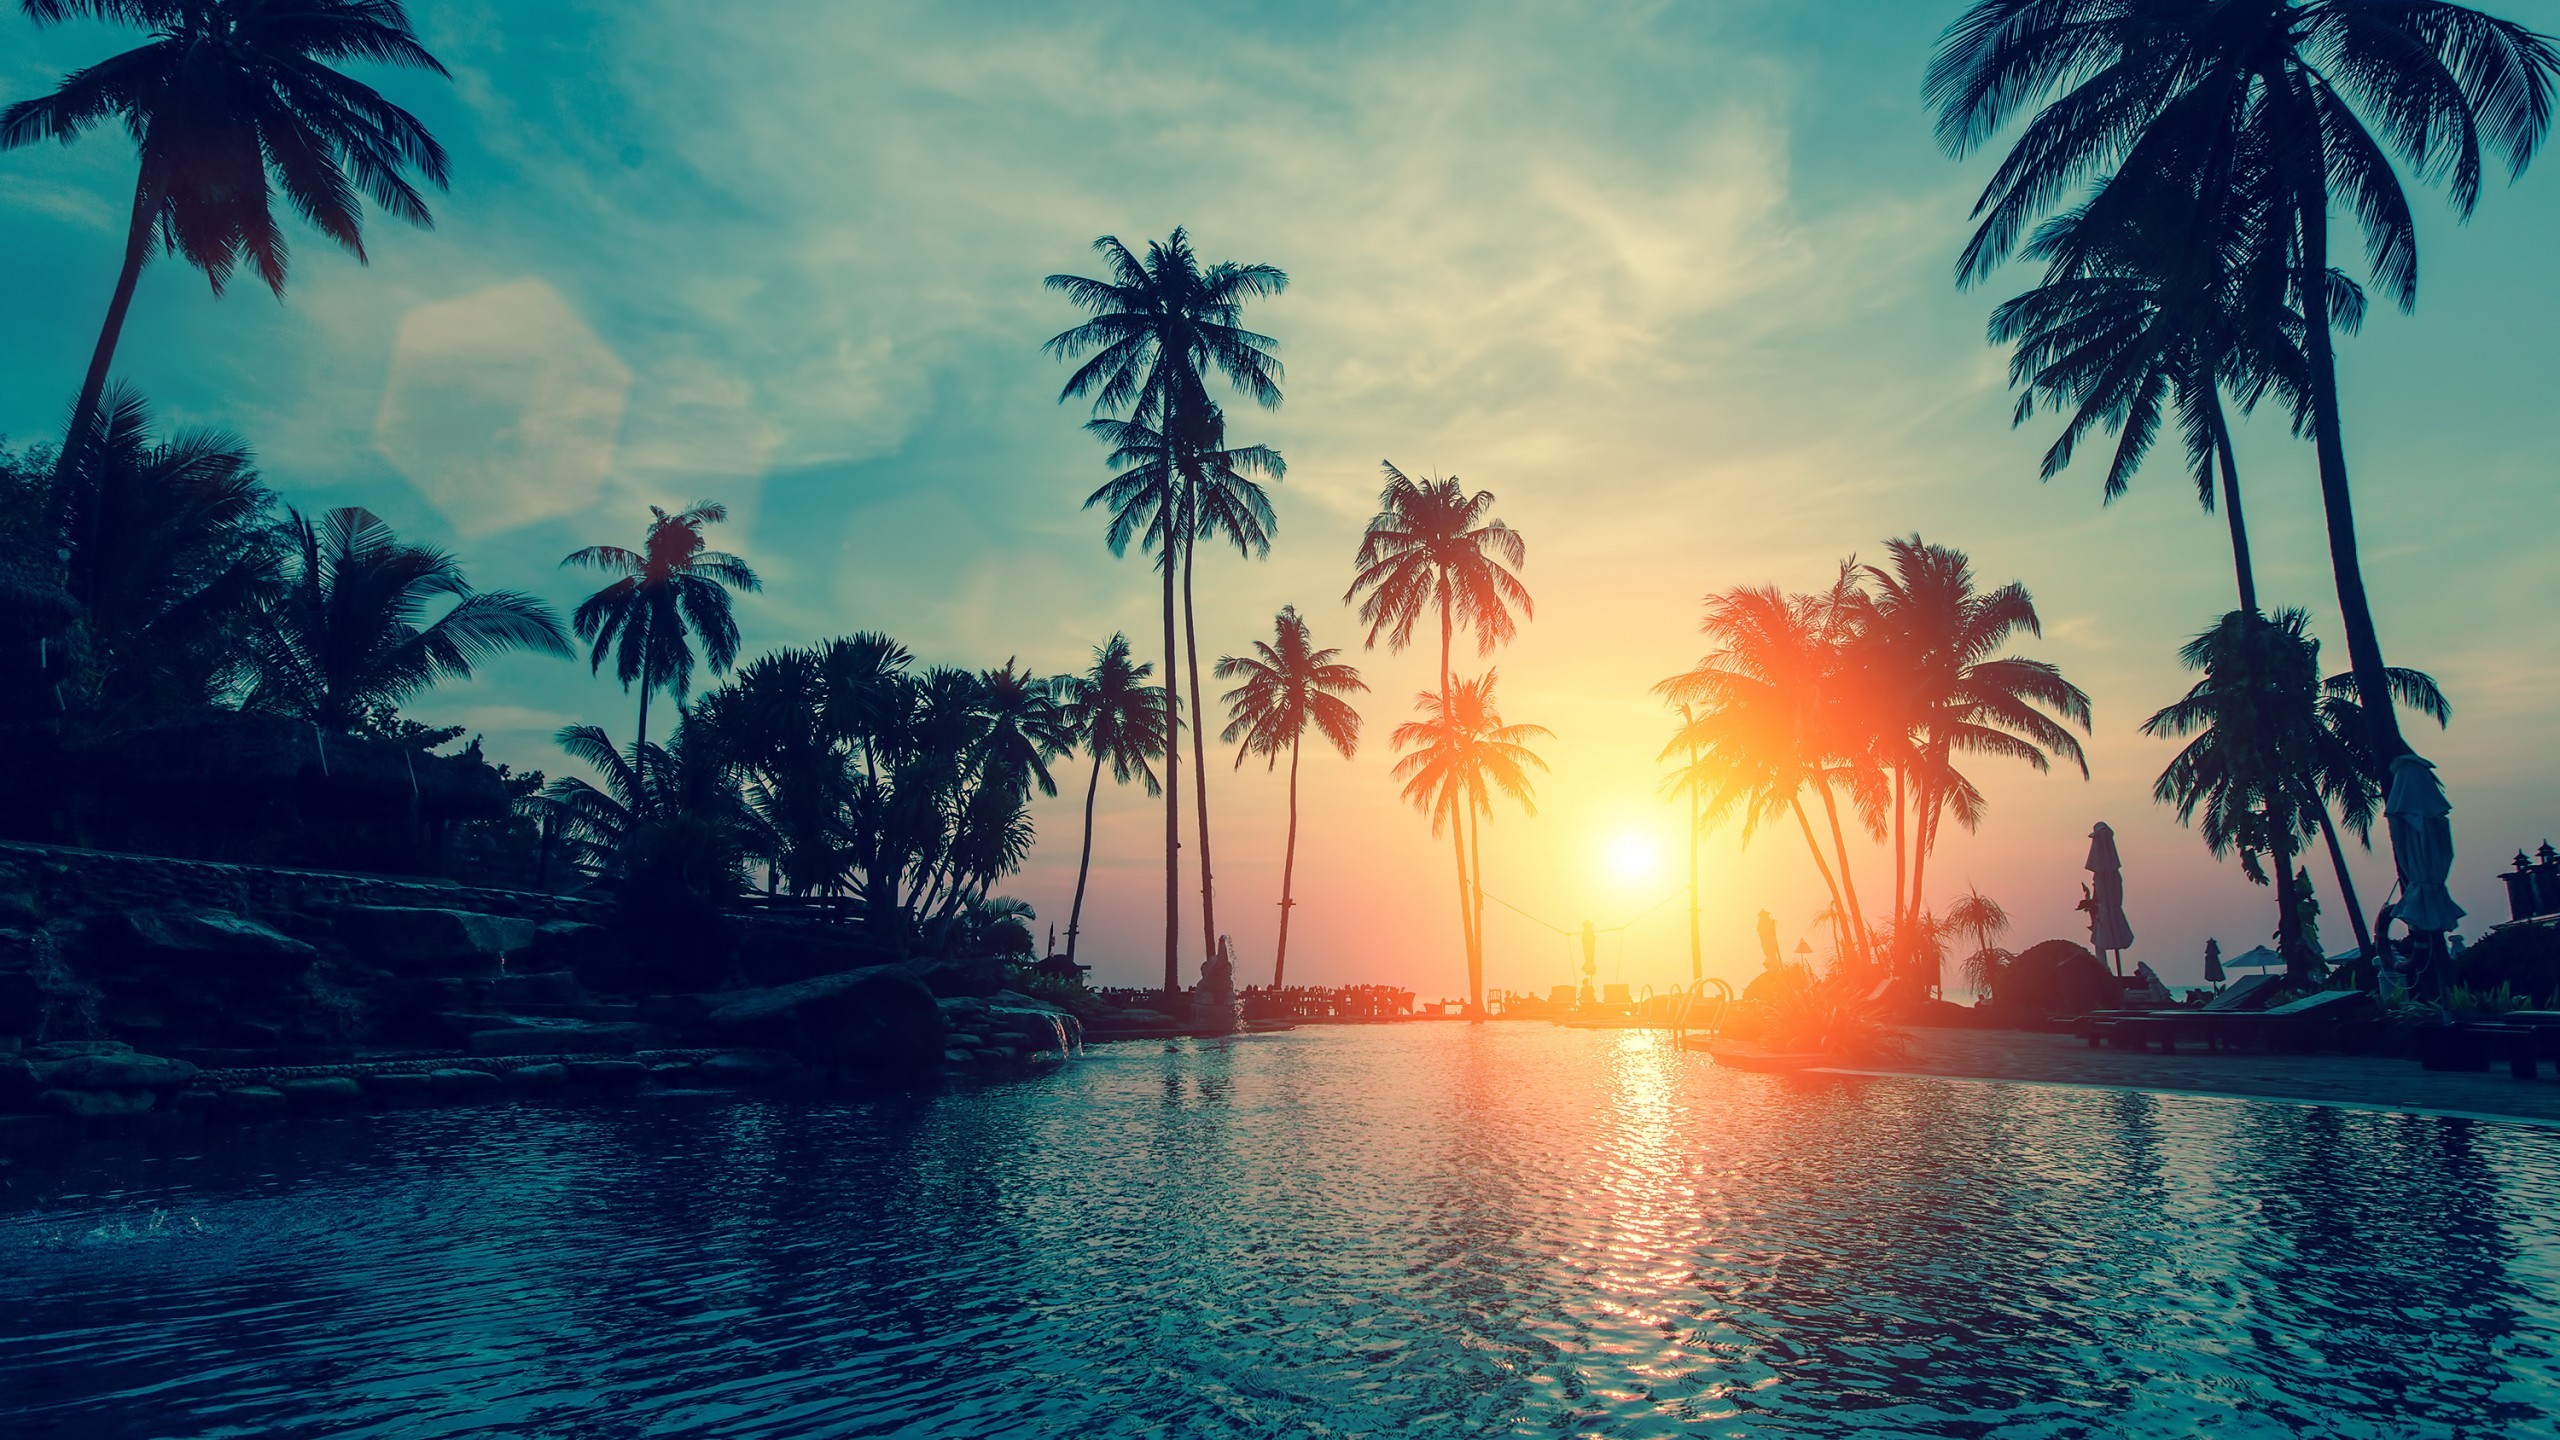 Sunset Palm Trees Wallpaper (62+ Images)